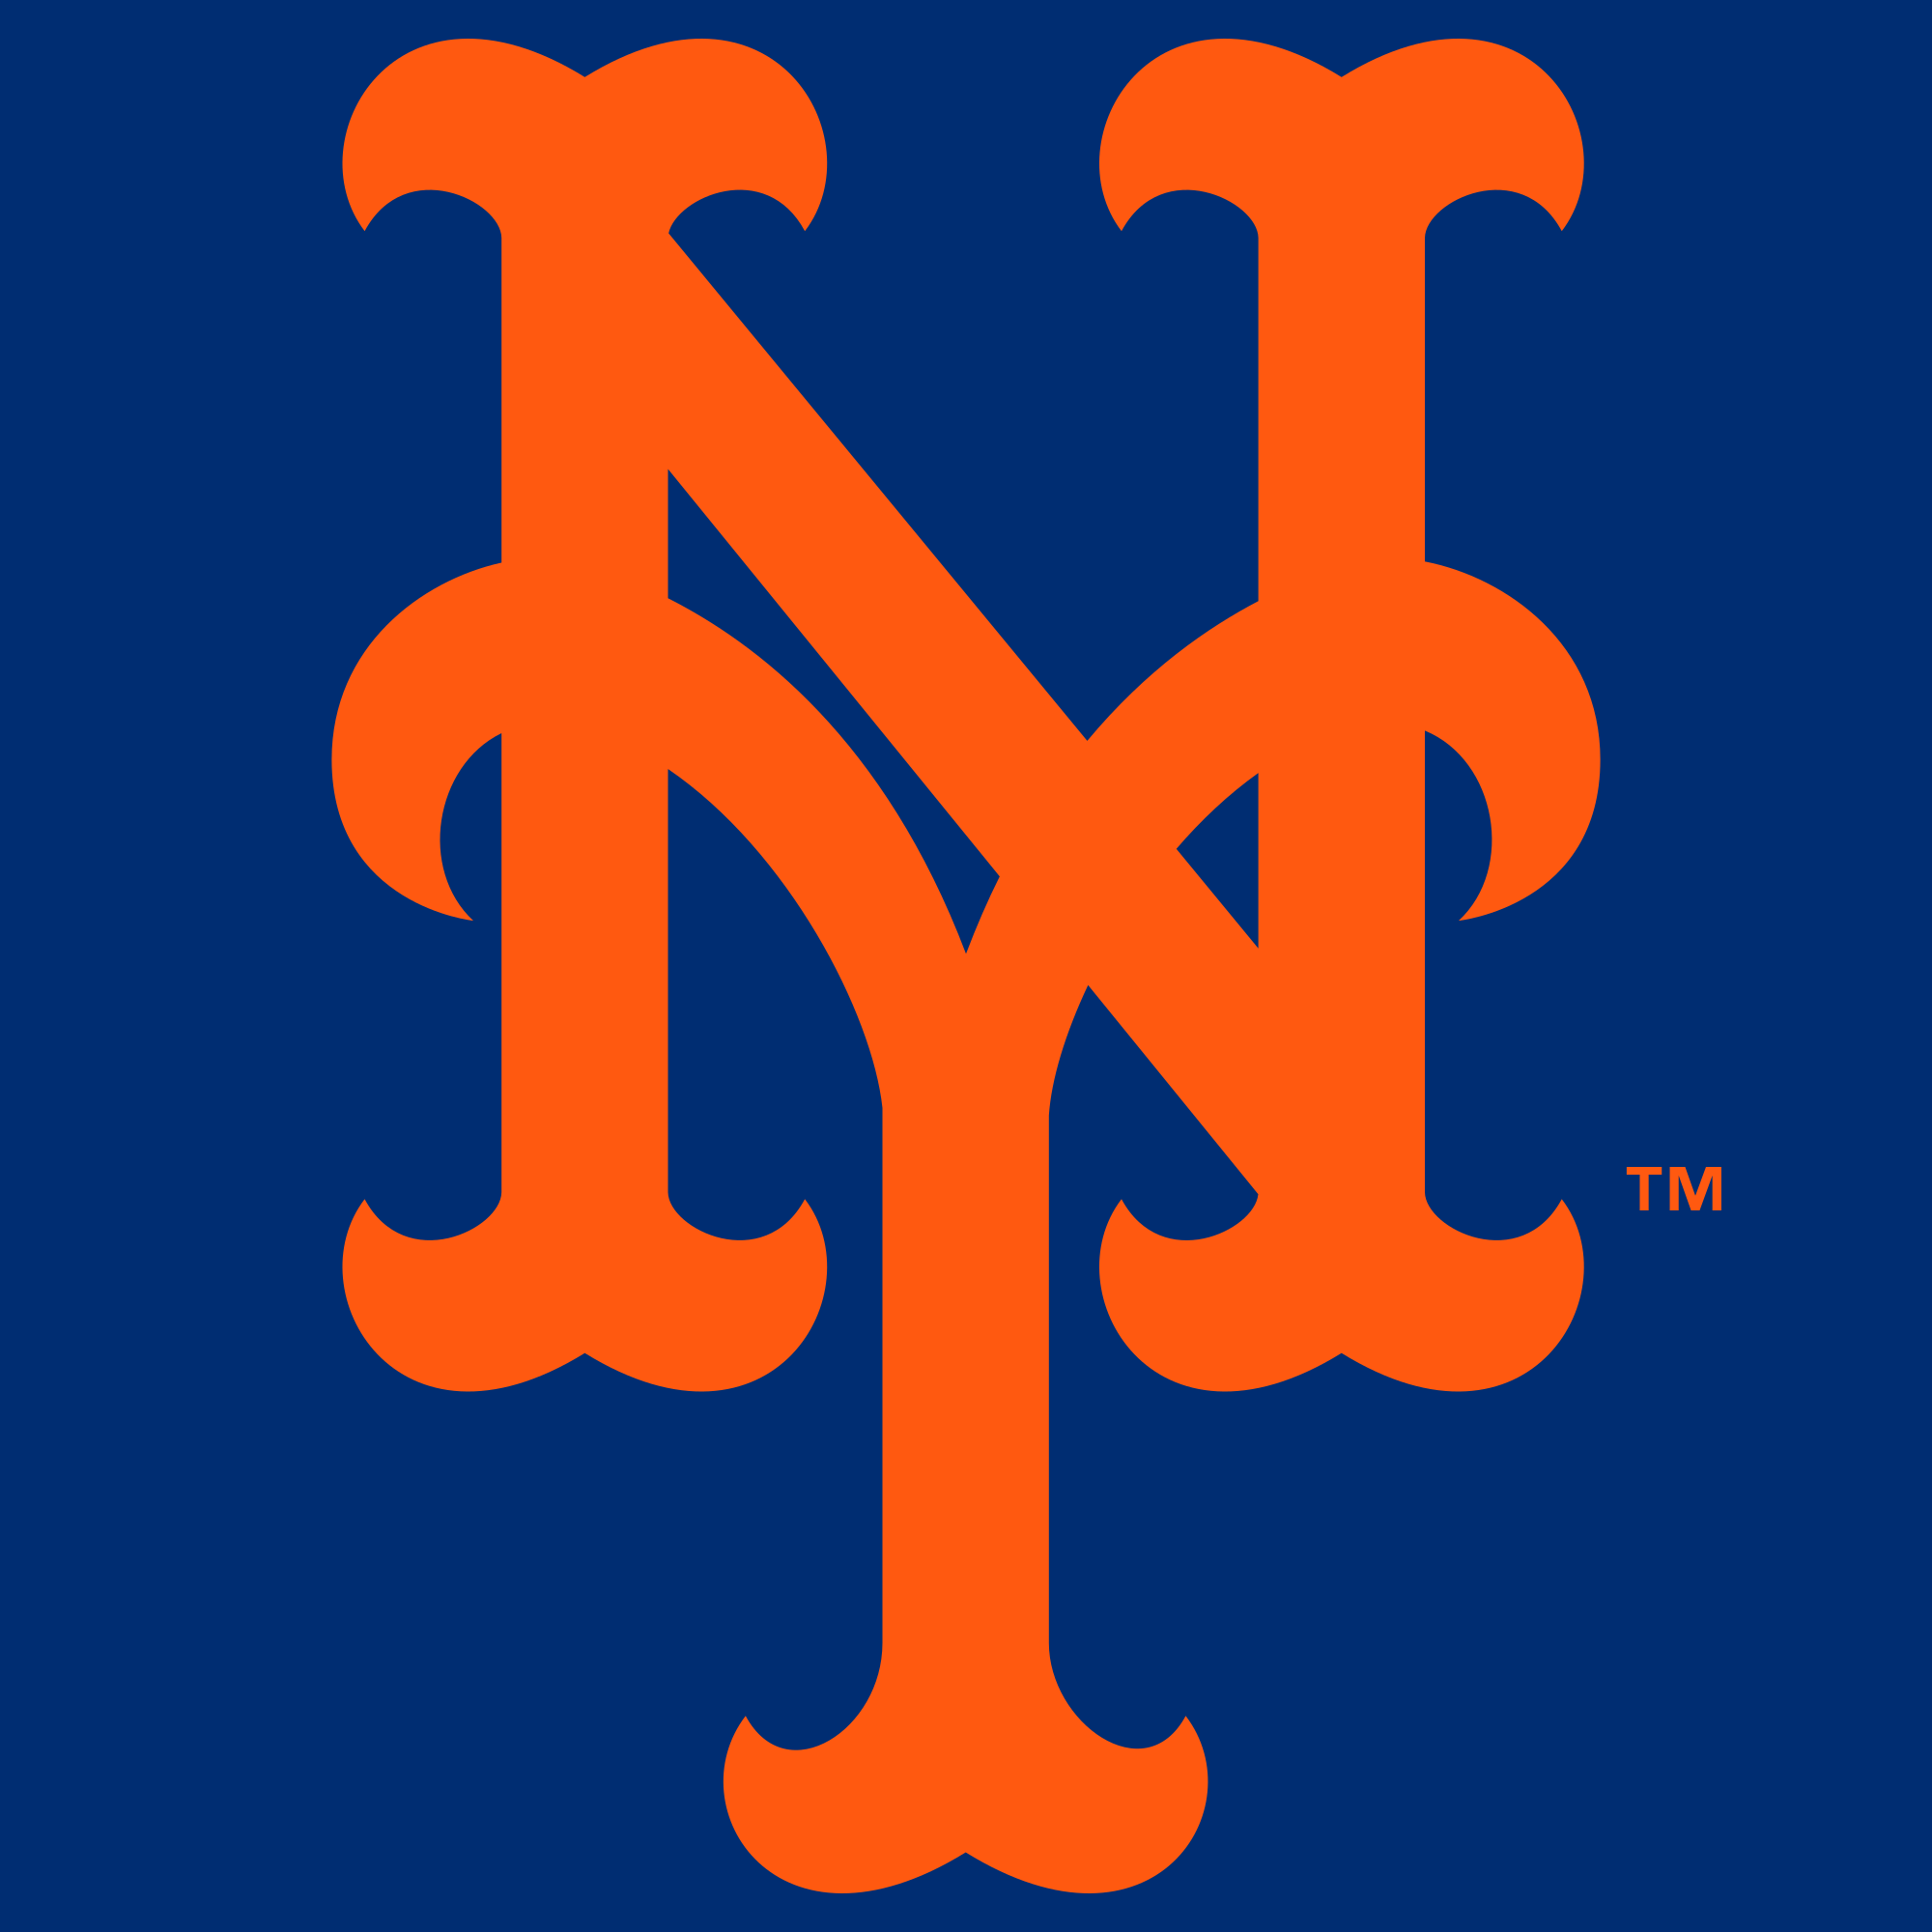 New York Mets Logo - Logos and uniforms of the New York Mets